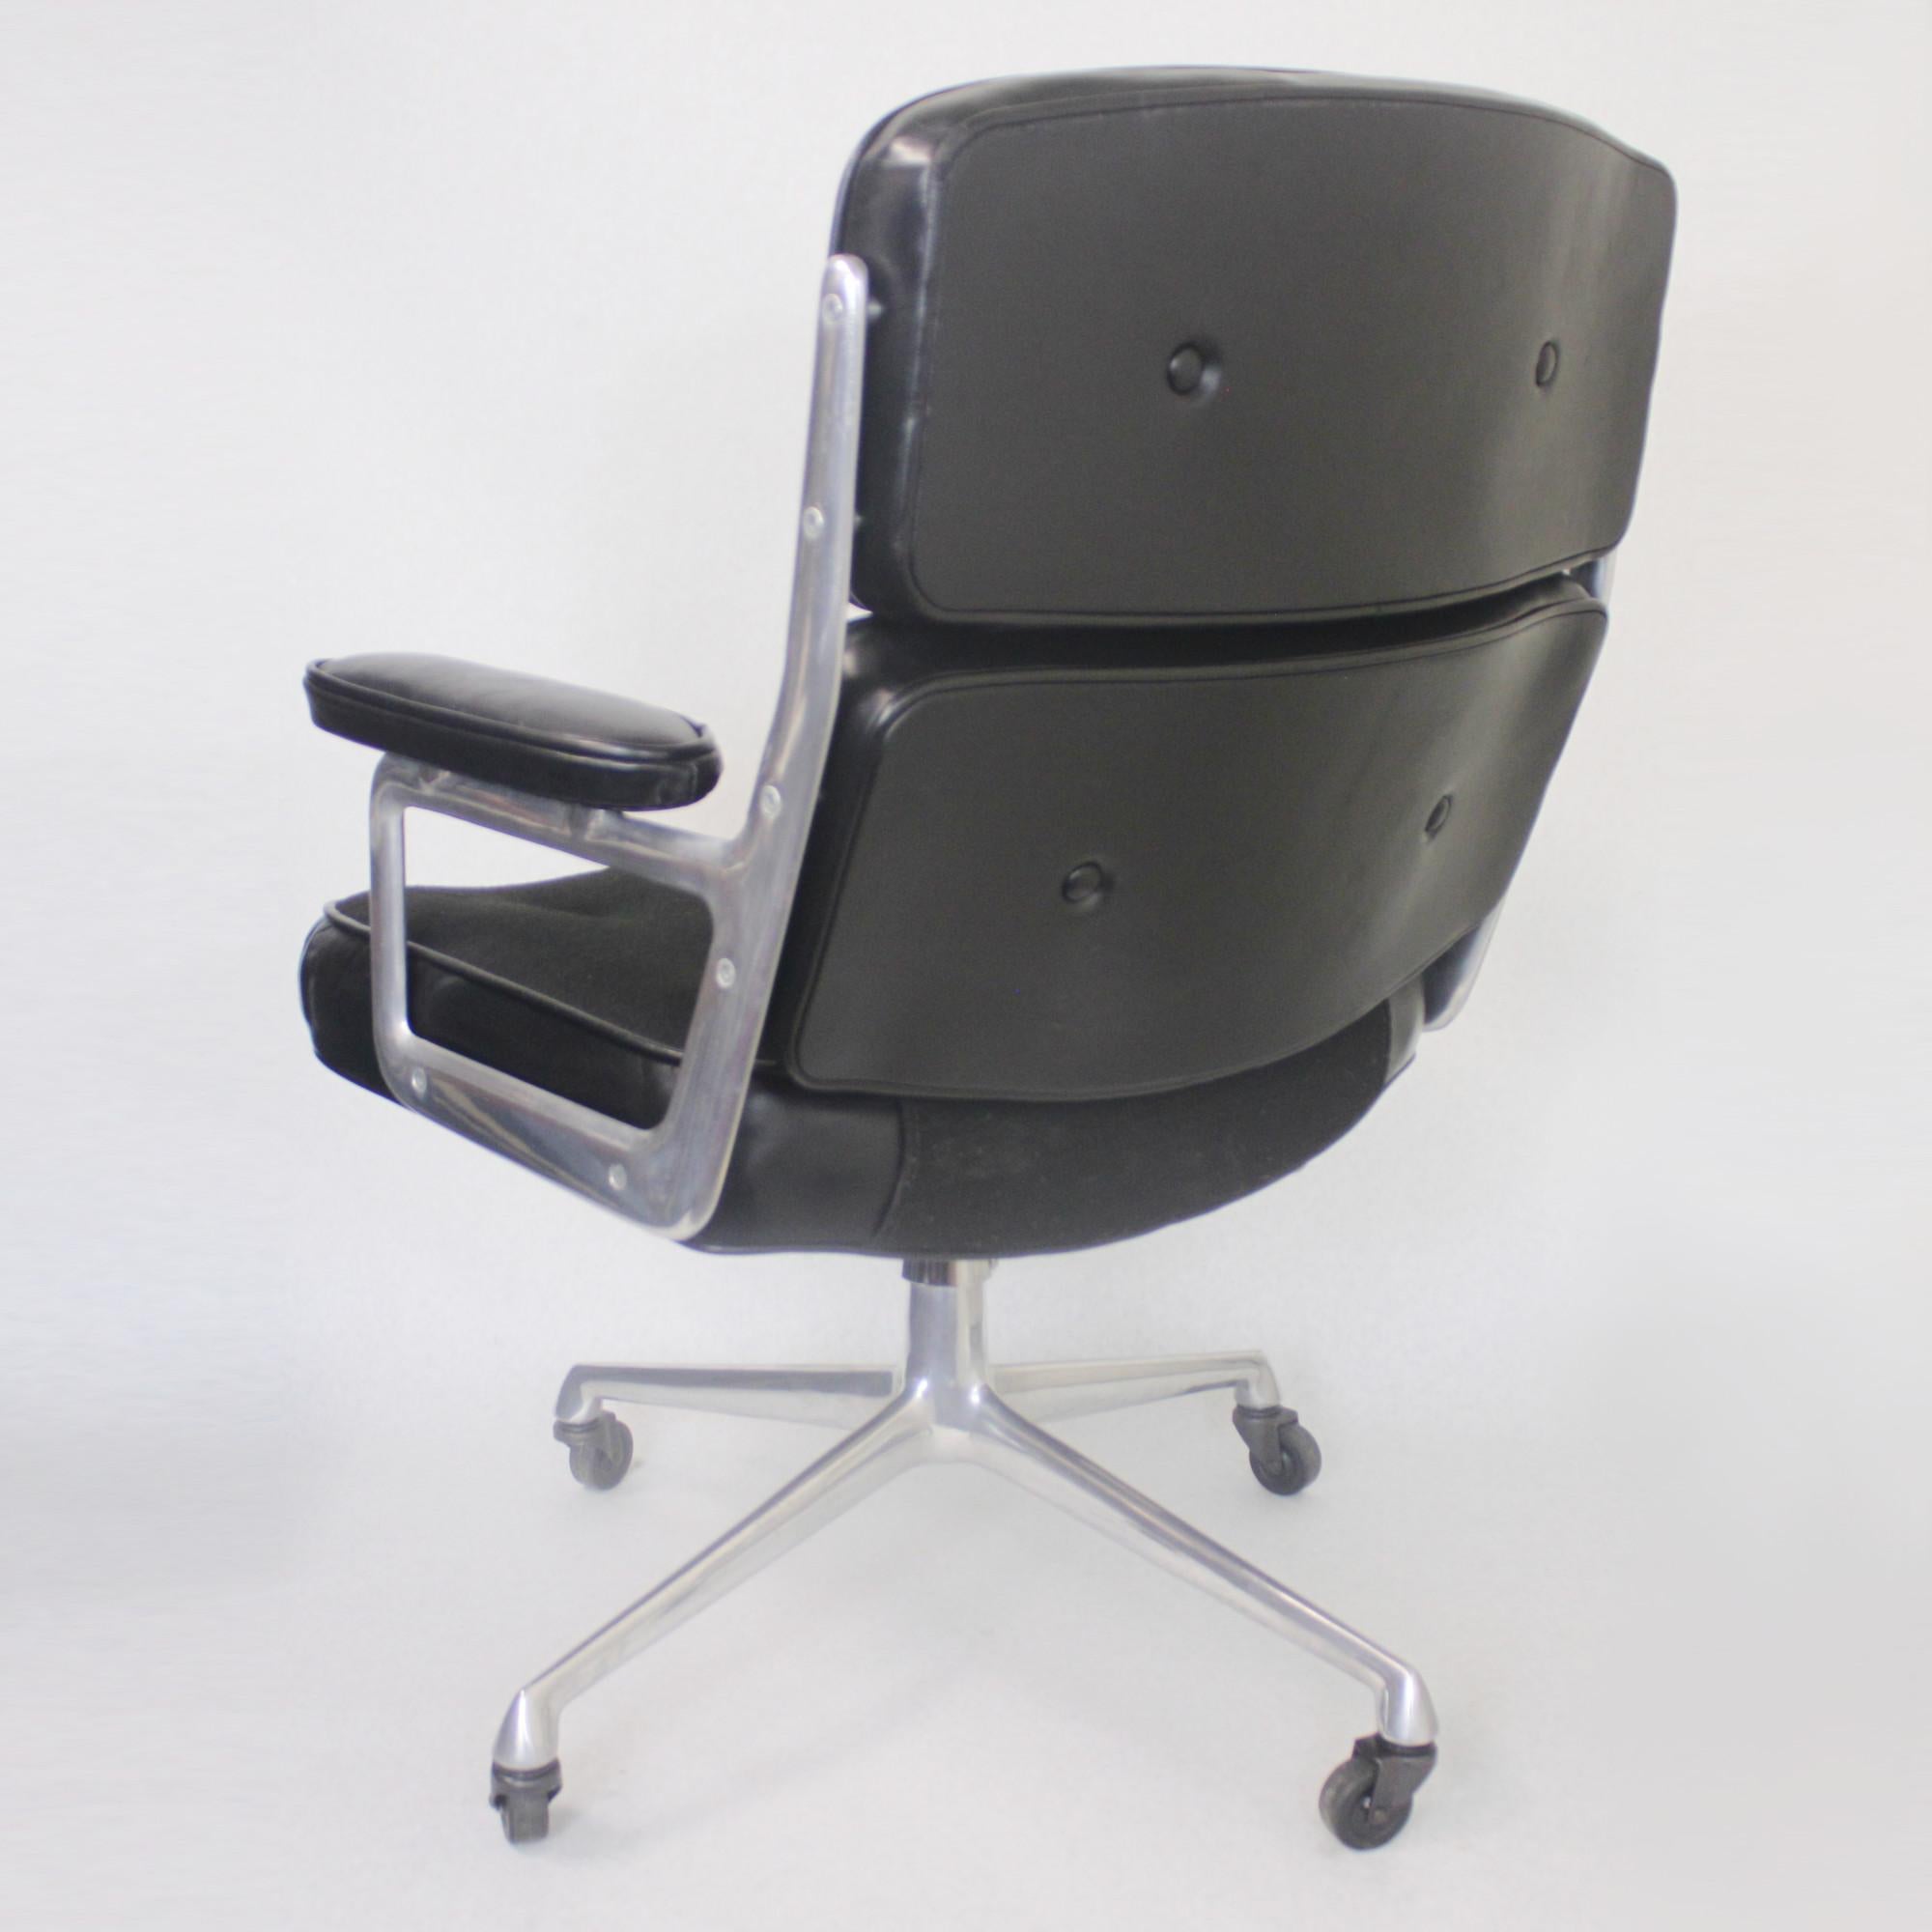 Spectacular 1960s, Herman Miller executive chair originally designed by Charles Eames for New York's Time life building. Chair features a polished aluminium frame, black tufted leather upholstery with black tufted cloth seat insert. Chair tilts,